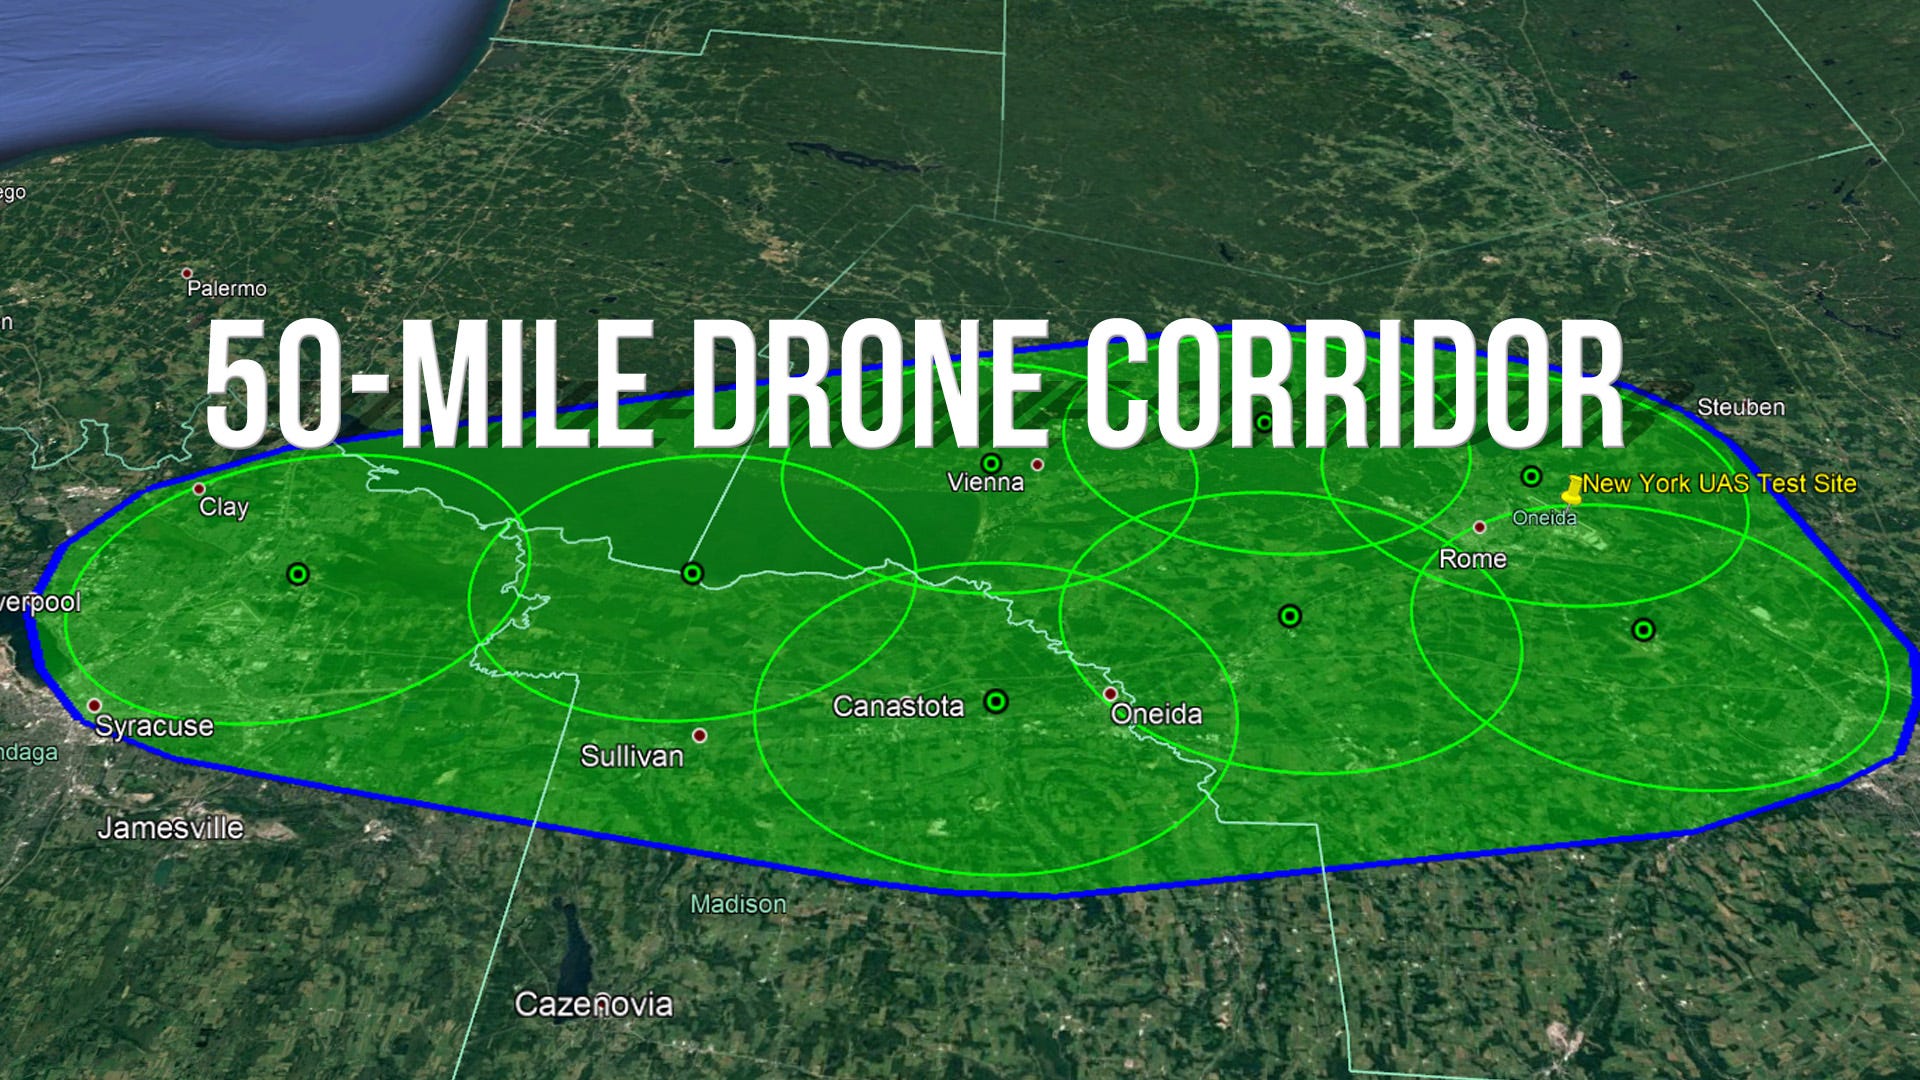 omfattende svinge Uddrag 5G drone testing coming to corridor between Rome and Syracuse